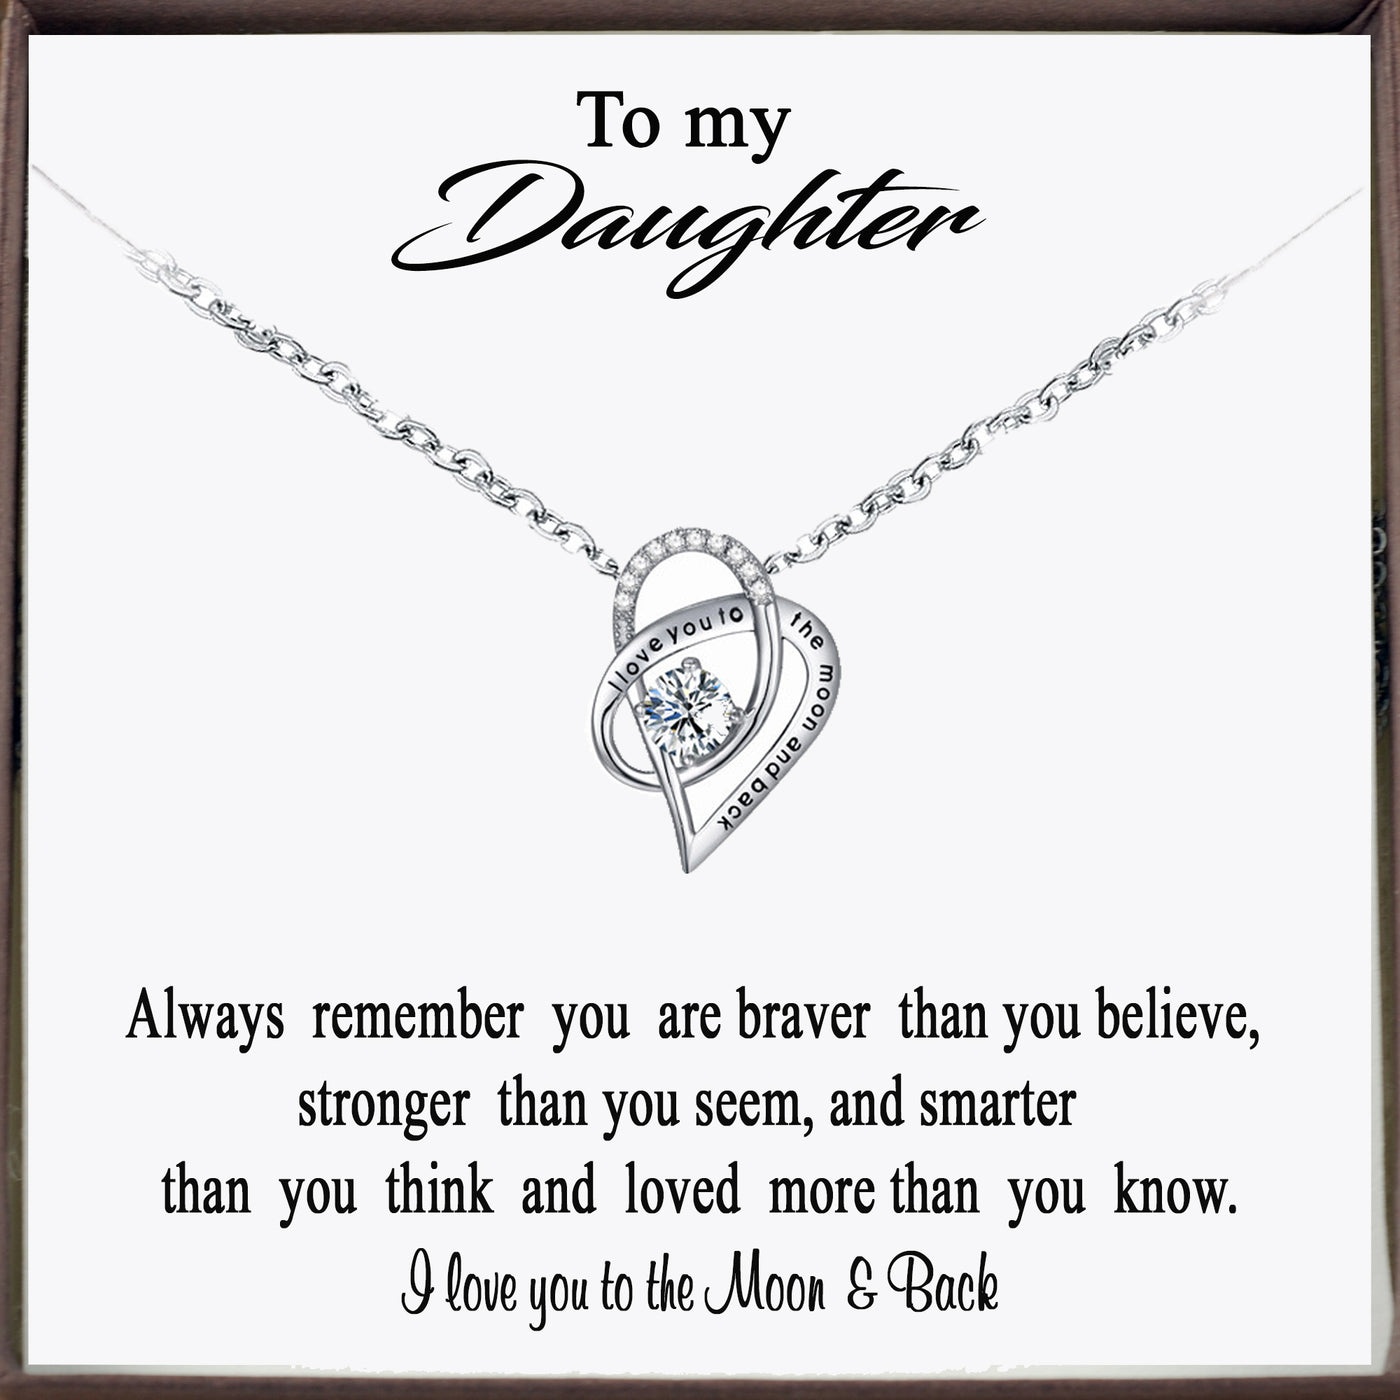 To my Daughter - I love you to the Moon & Back - Godfullness